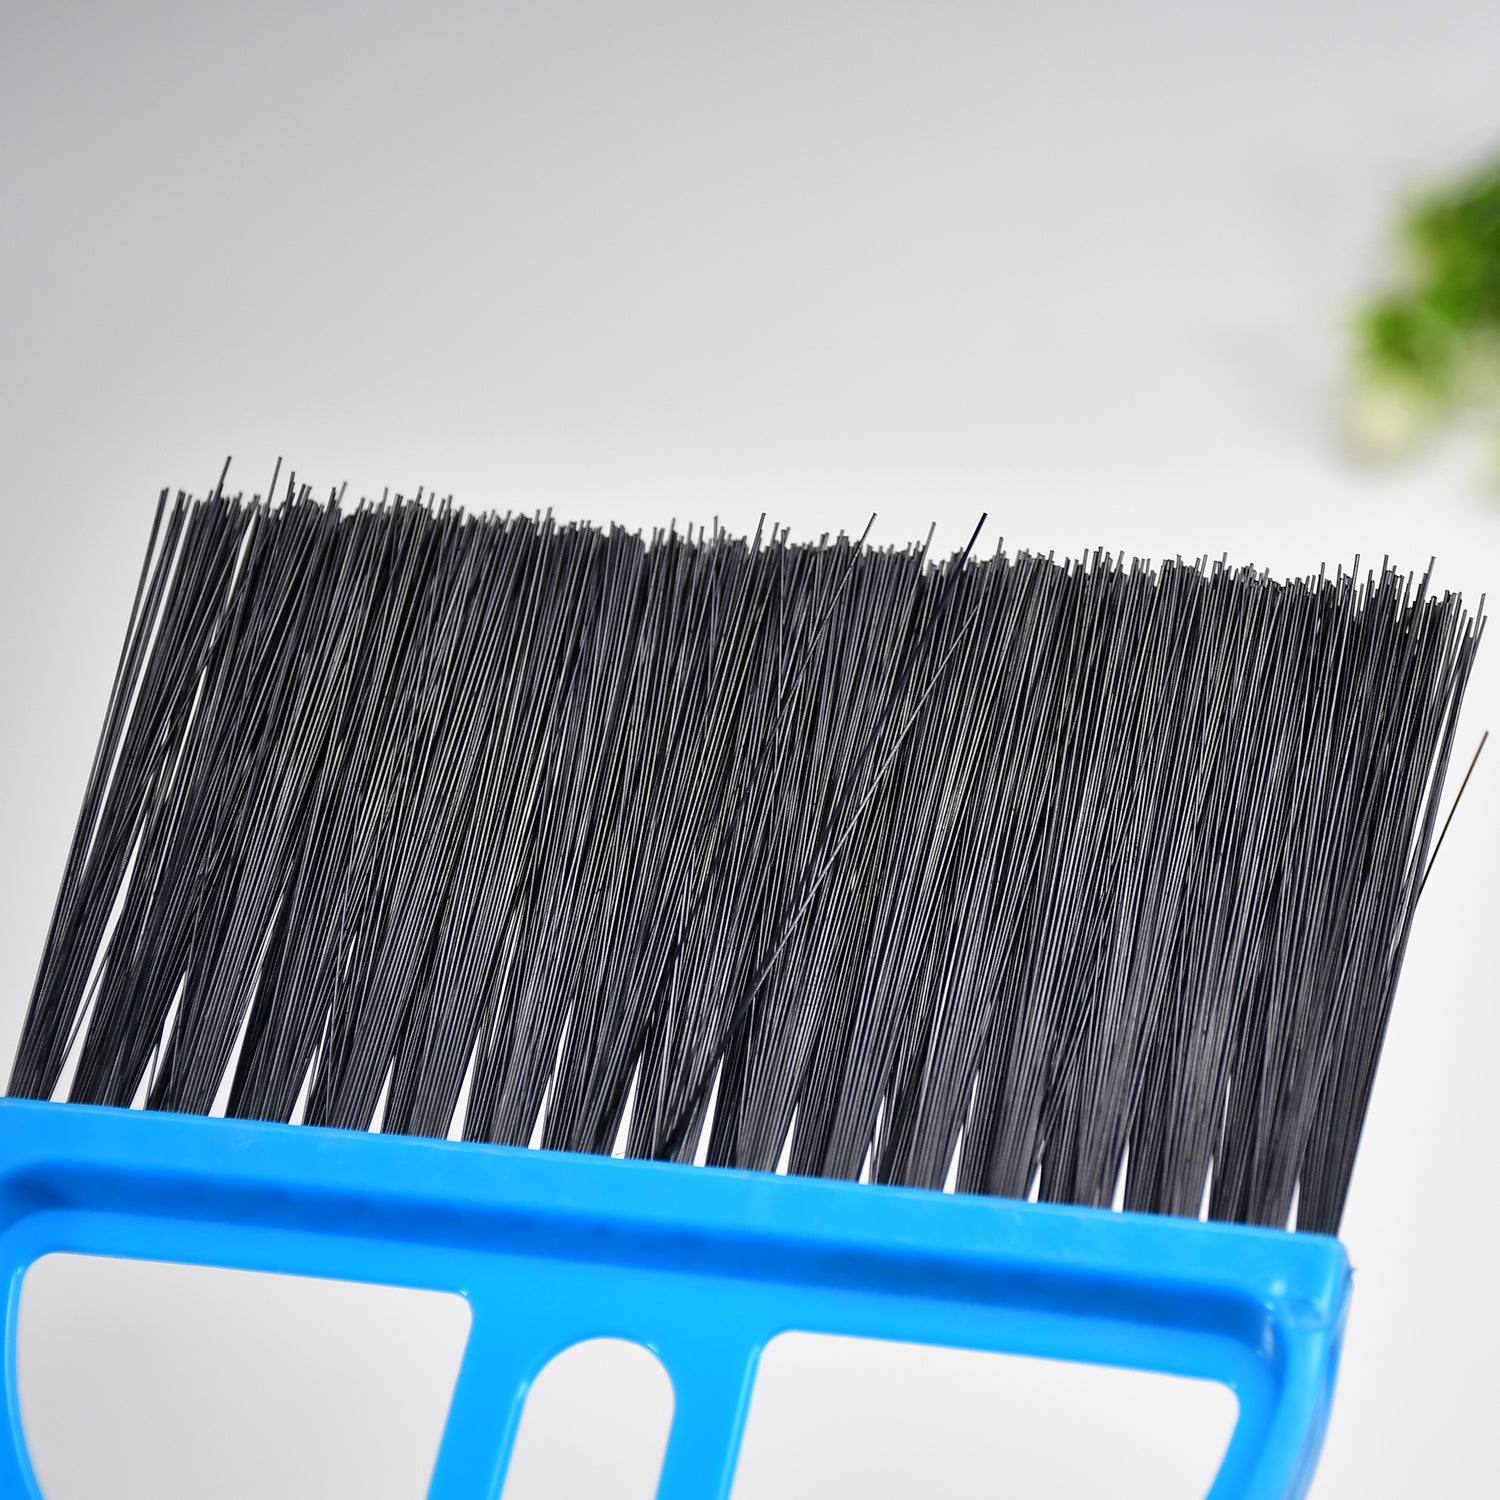 6671 Small Dustpan Brush for multipurpose use in home and kitchen (1pc Brush) DeoDap